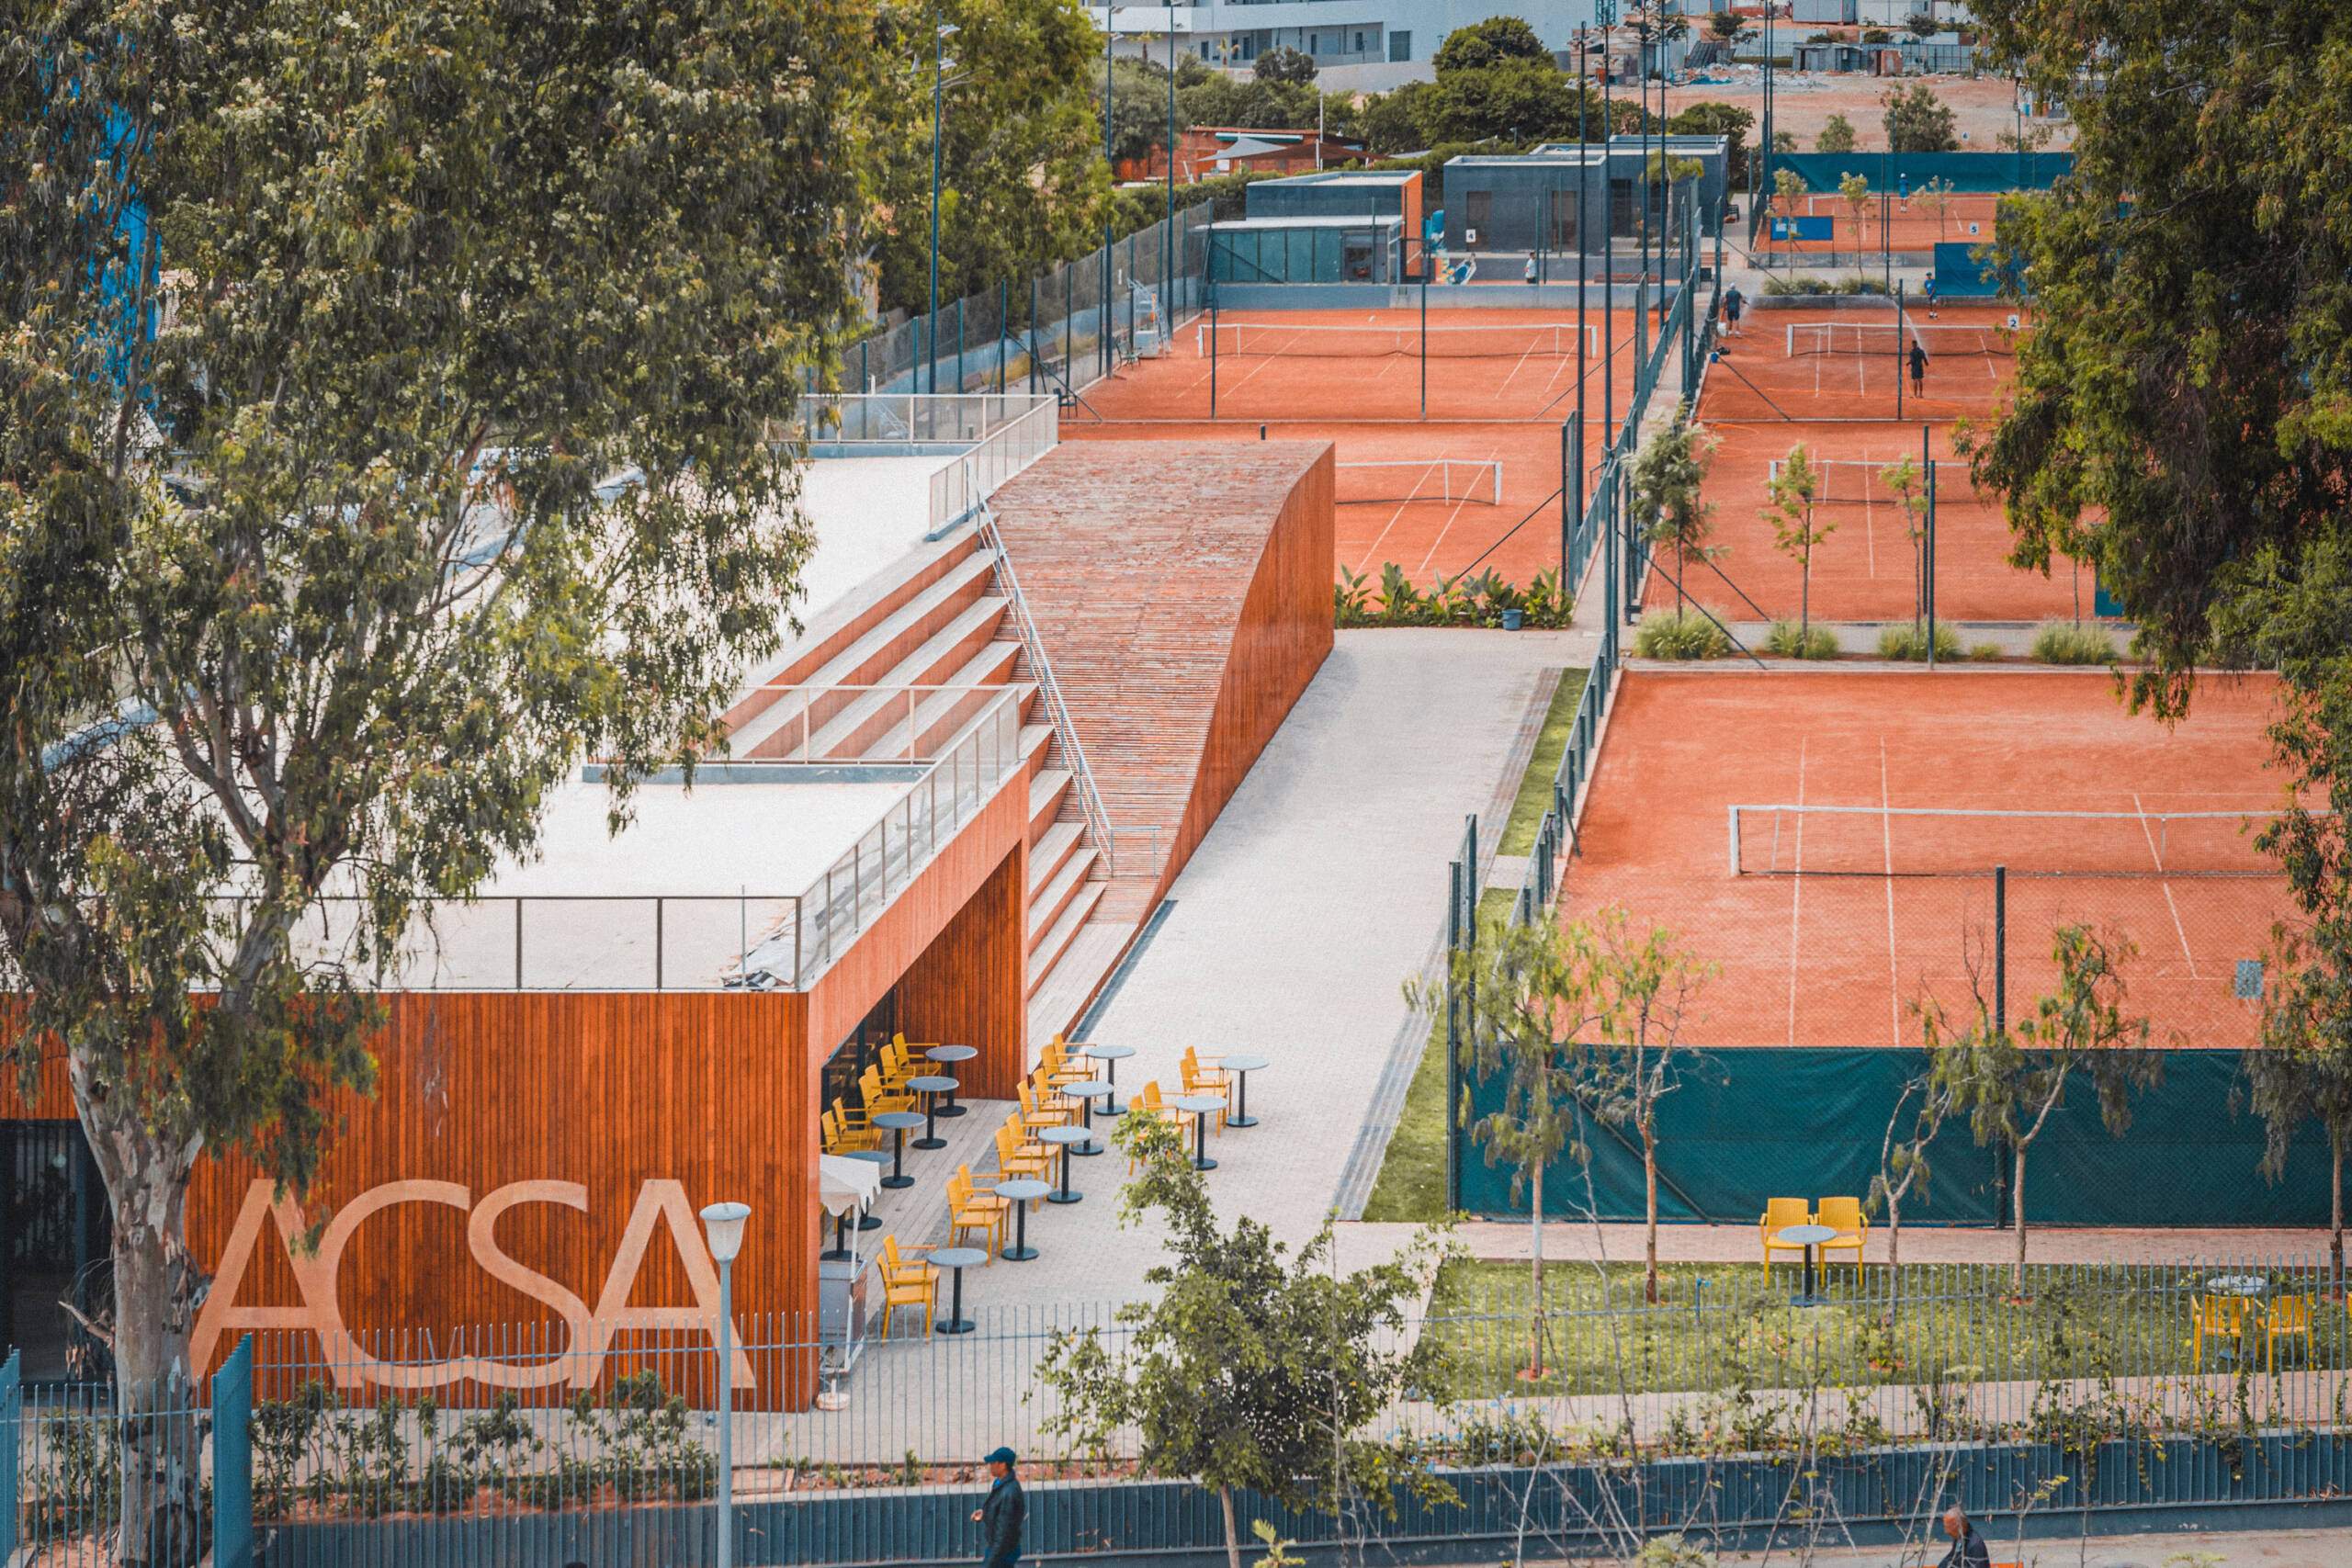 YDA Architects  – Architecture Photography of ACSA Tennis Club in Casablanca